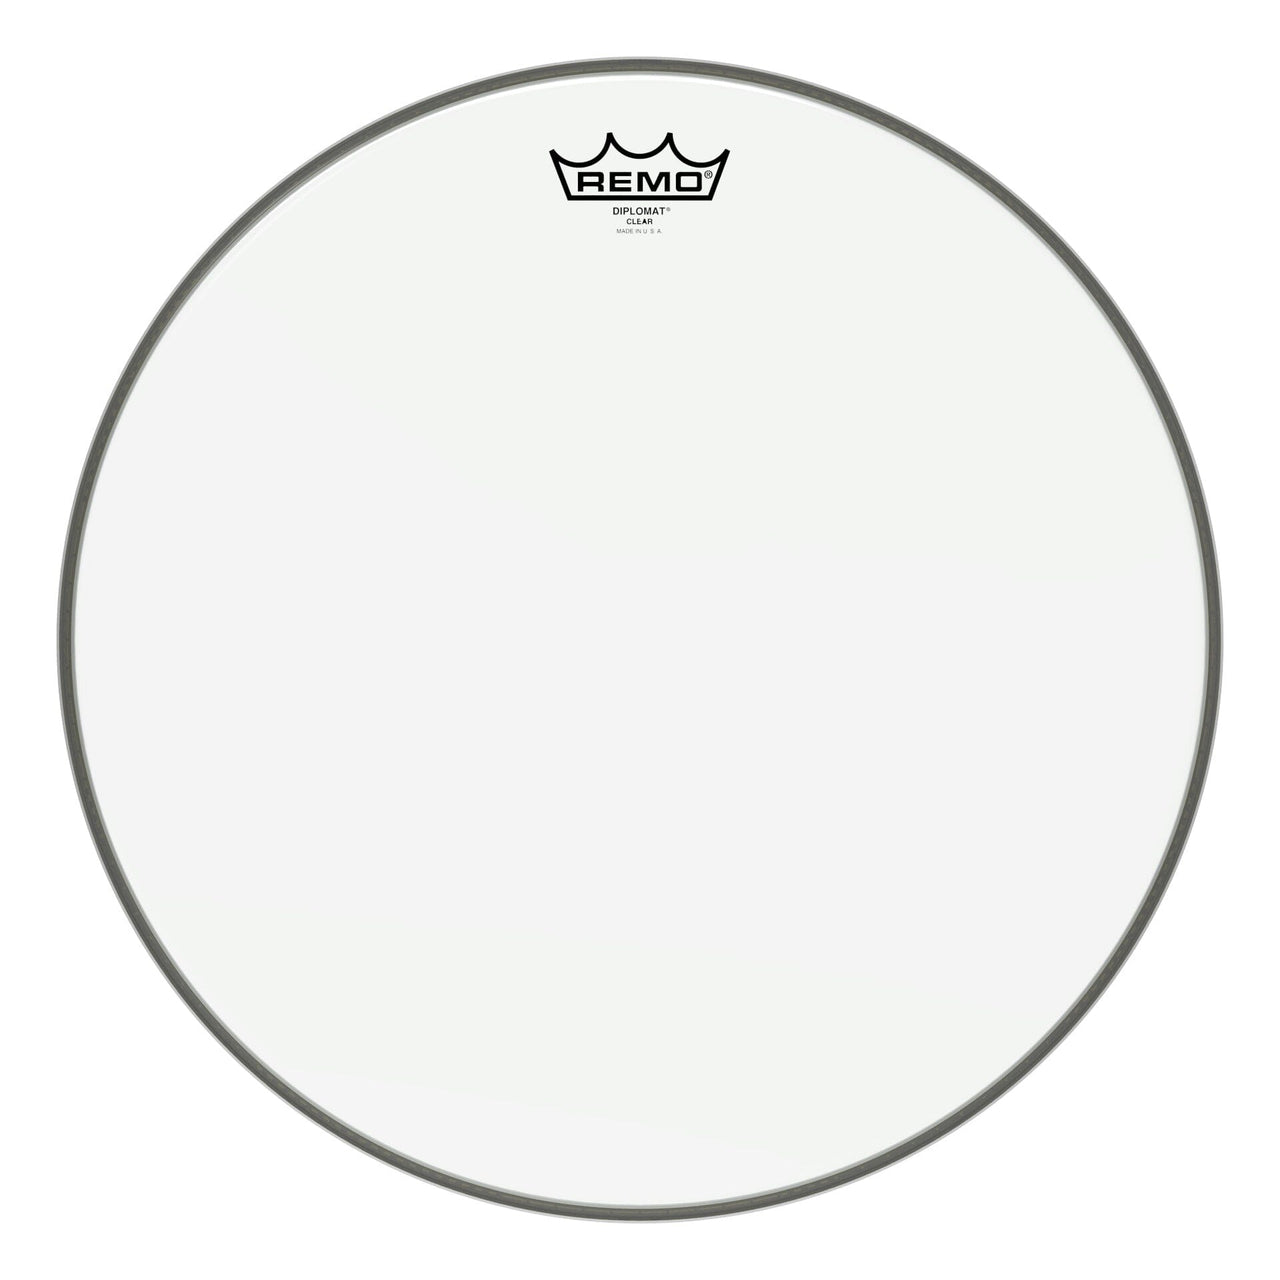 REMO 13" Clear Diplomat Drum Head (BD-0313-00) Drum Heads Remo 